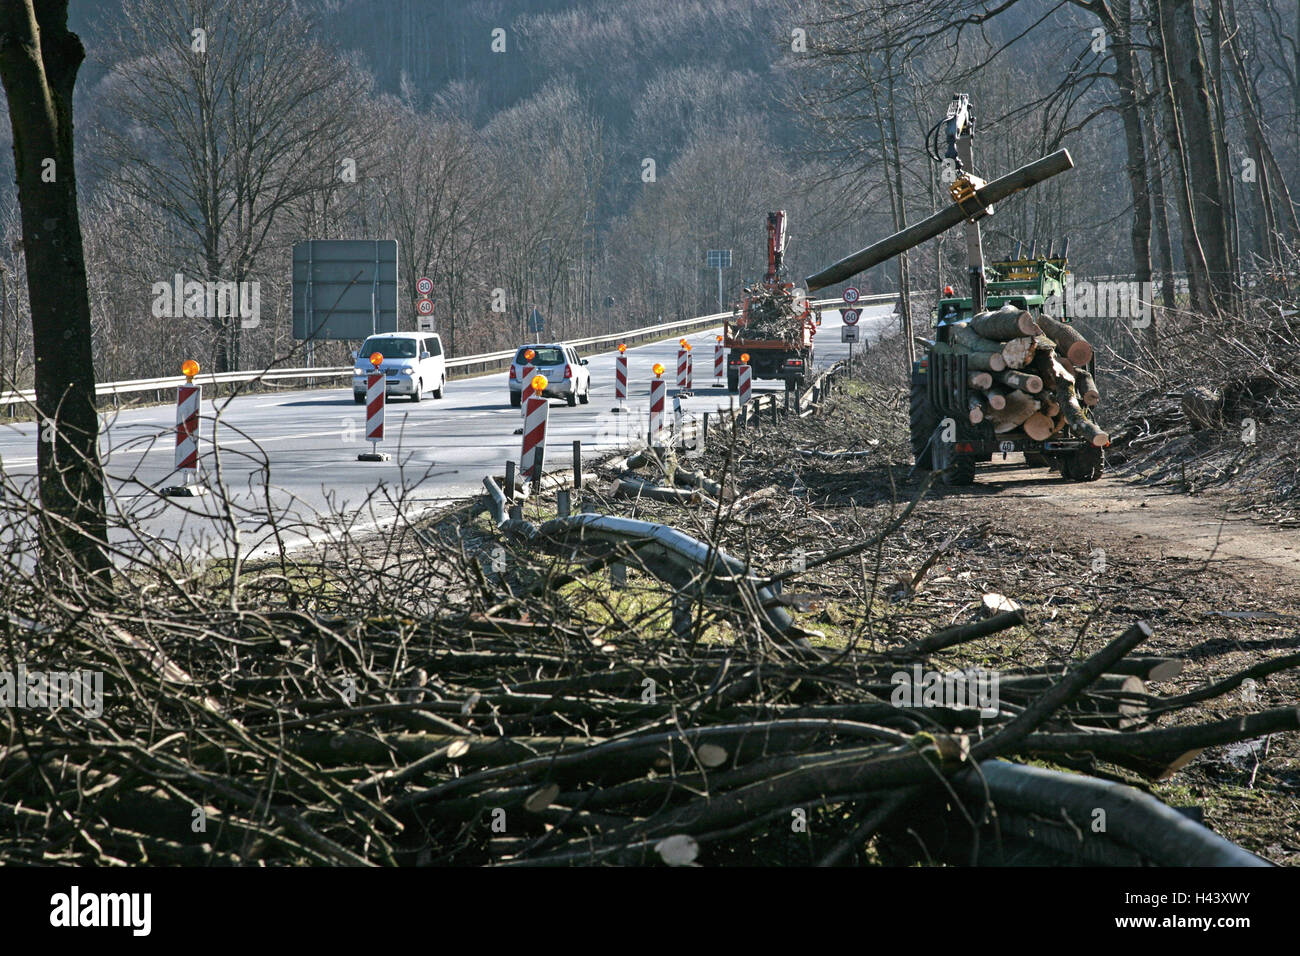 Germany, Bavaria, Landshut, barrack mountain, attack damages, clearing works, Upper Bavaria, federal highway, blocking, pavement choking passage, traffic, roadside, wood, tractor, tractor, trailer, truck, trunks, twigs, branches, charge, charge, evacuation, clear up, edge the forest, cyclone, wind rupture, destruction, climate change, greenhouse effect, weather caprioles, disaster, natural disaster, Stock Photo